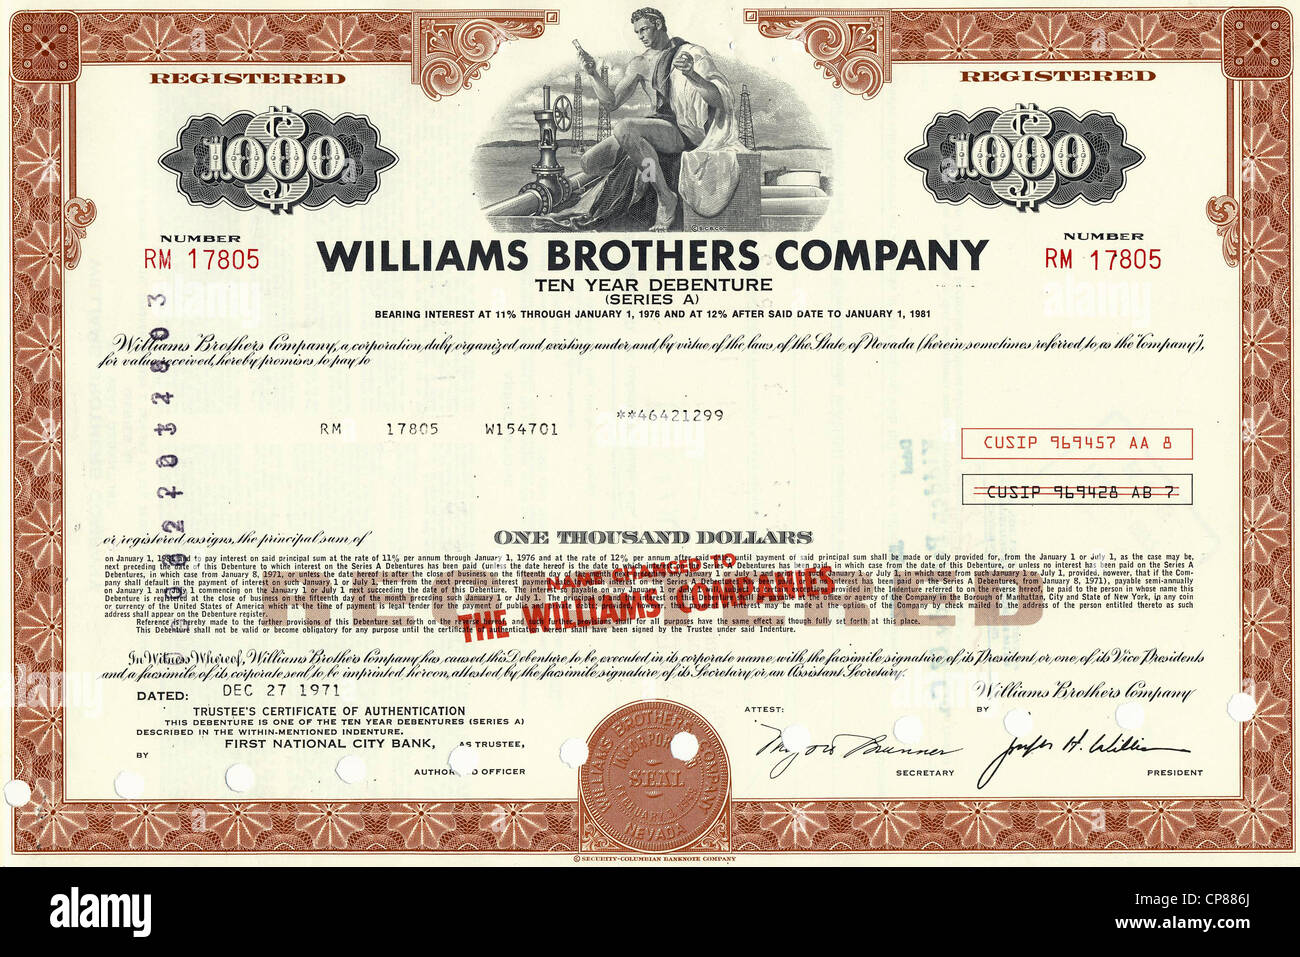 Historical stock certificate of an oil and gas company, oil pipeline, energy company, Williams Brothers Company, Tulsa, Oklahoma Stock Photo